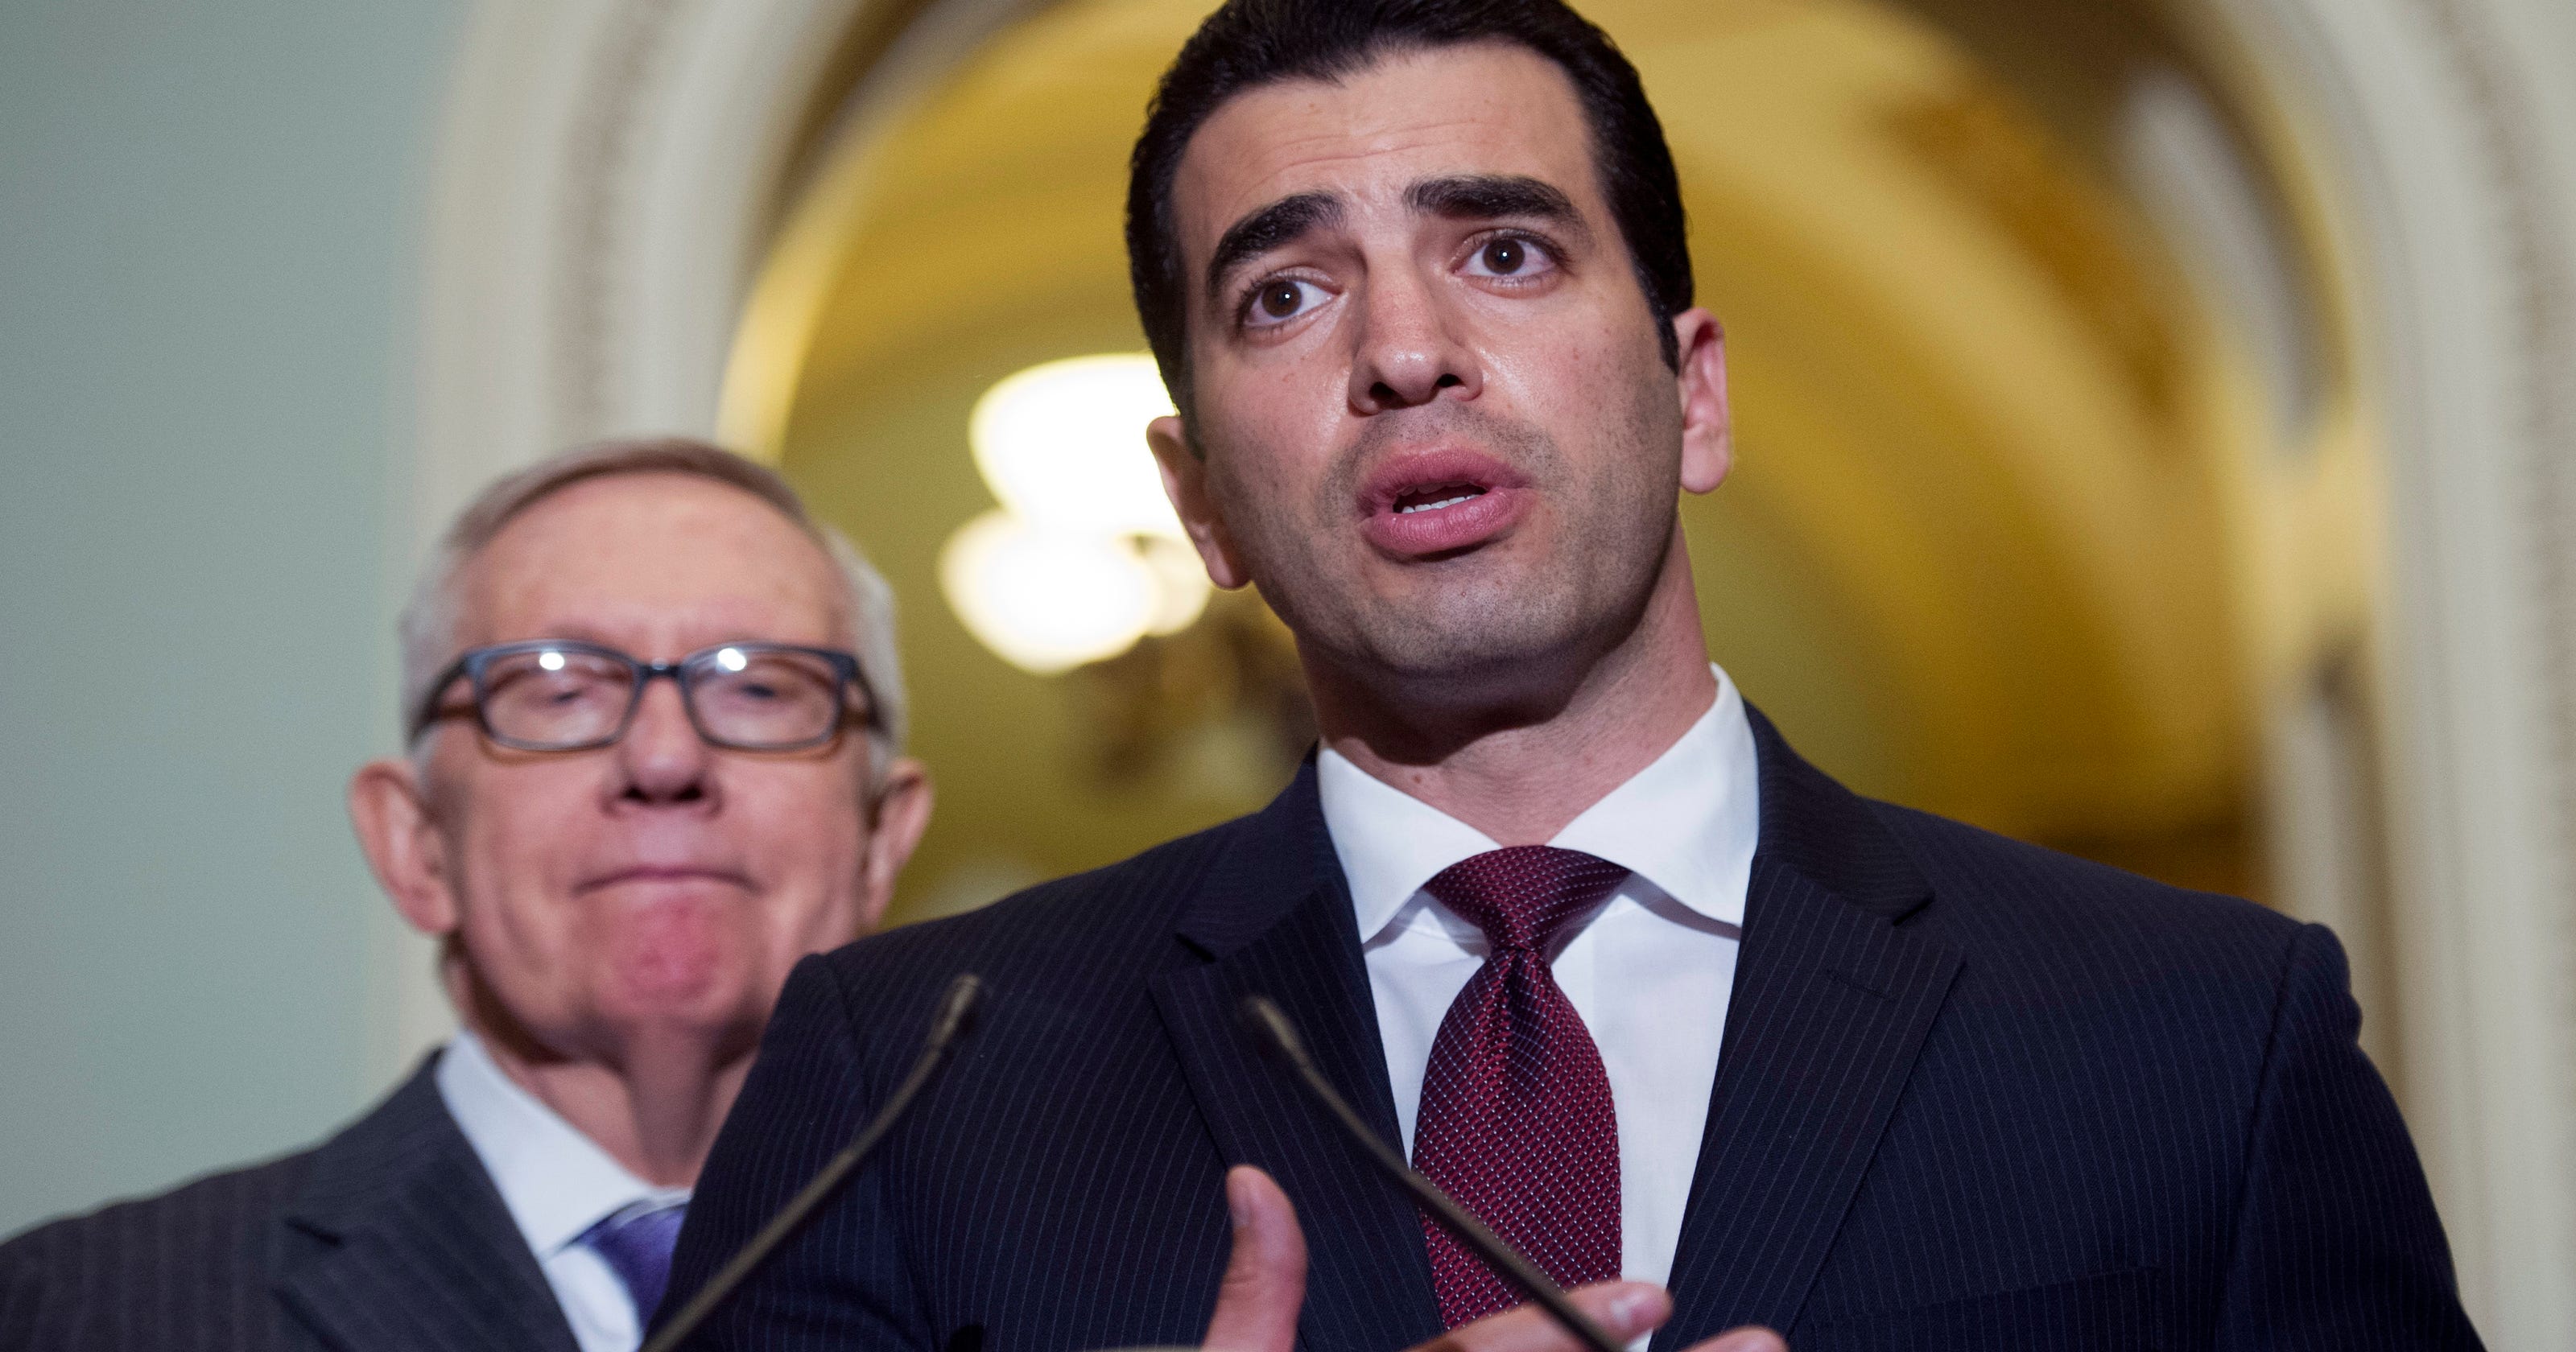 Ethics Panel To Probe Alleged Harassment By Kihuen